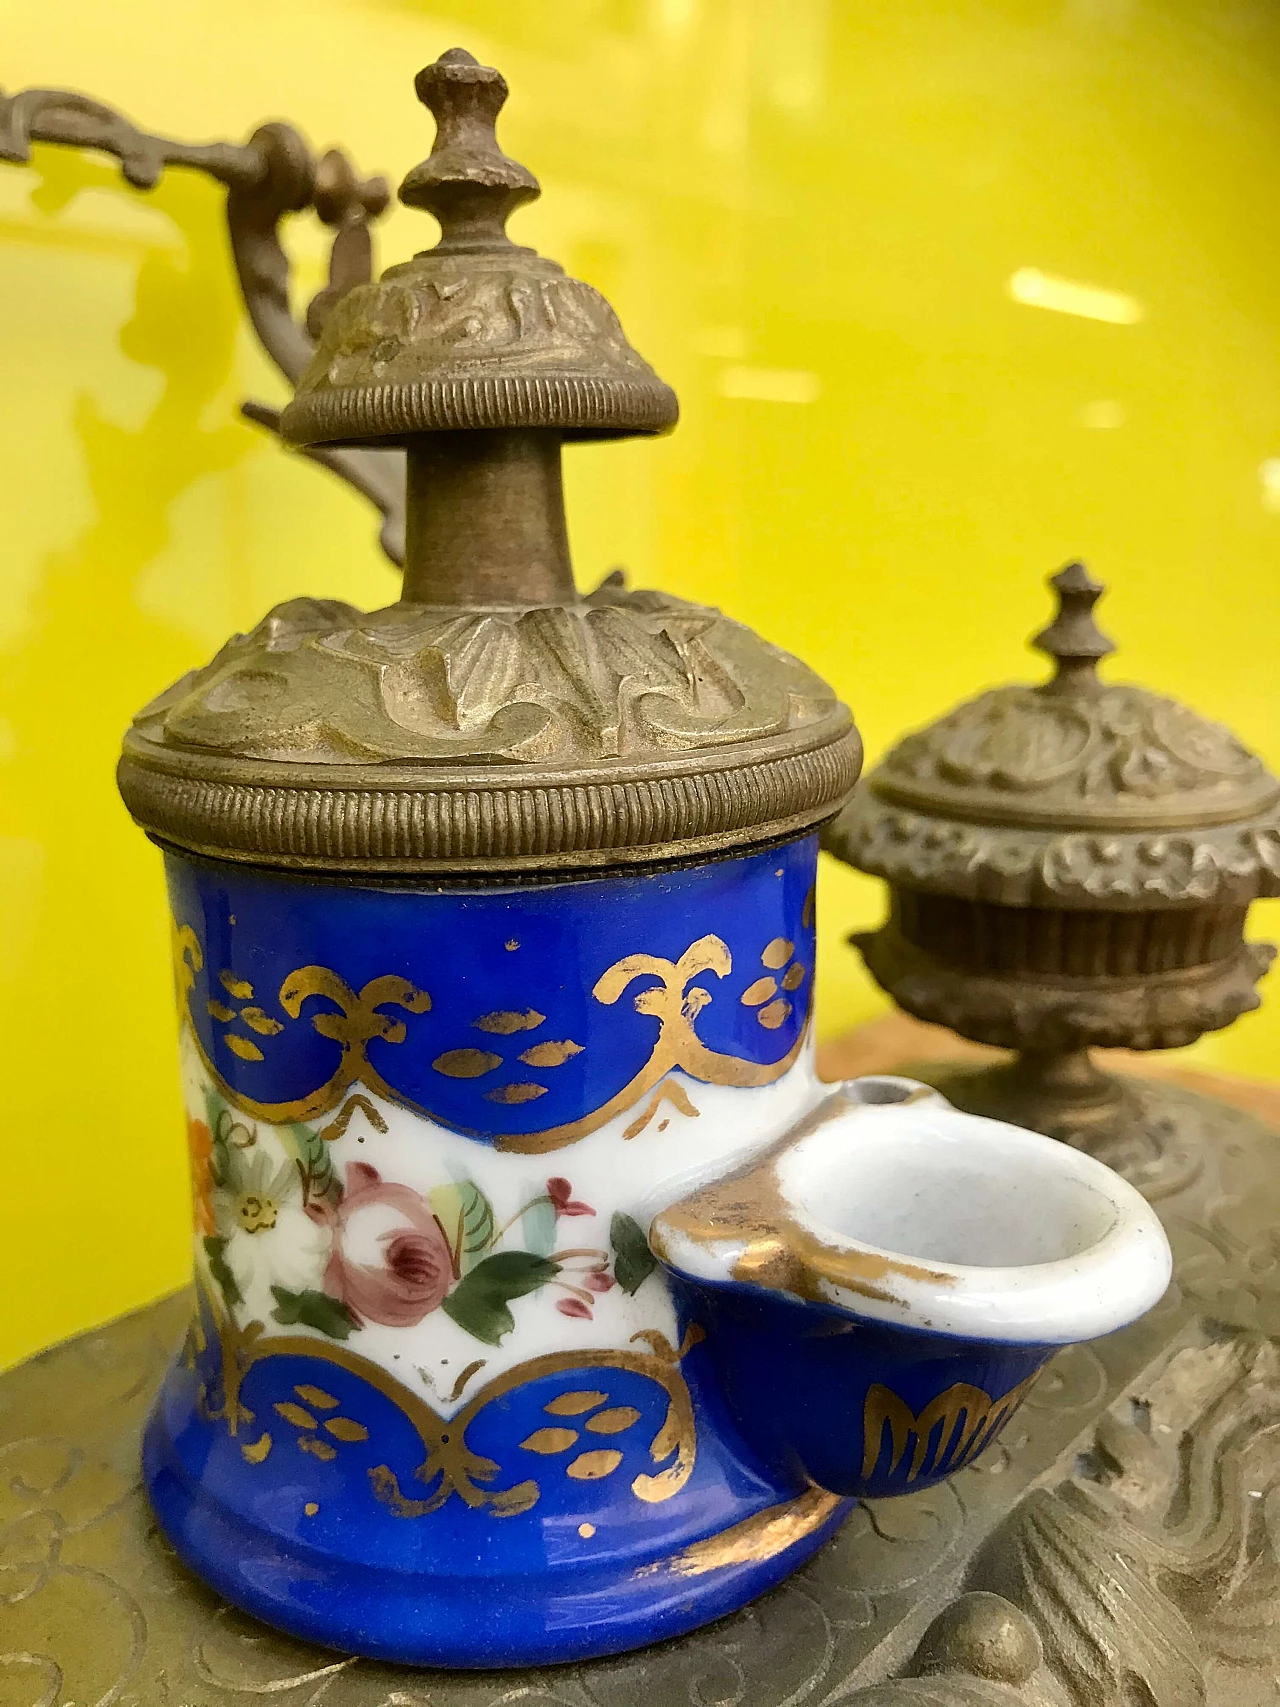 Sevrès porcelain and bronze inkwell with Pen Holder, 19th century 1167736